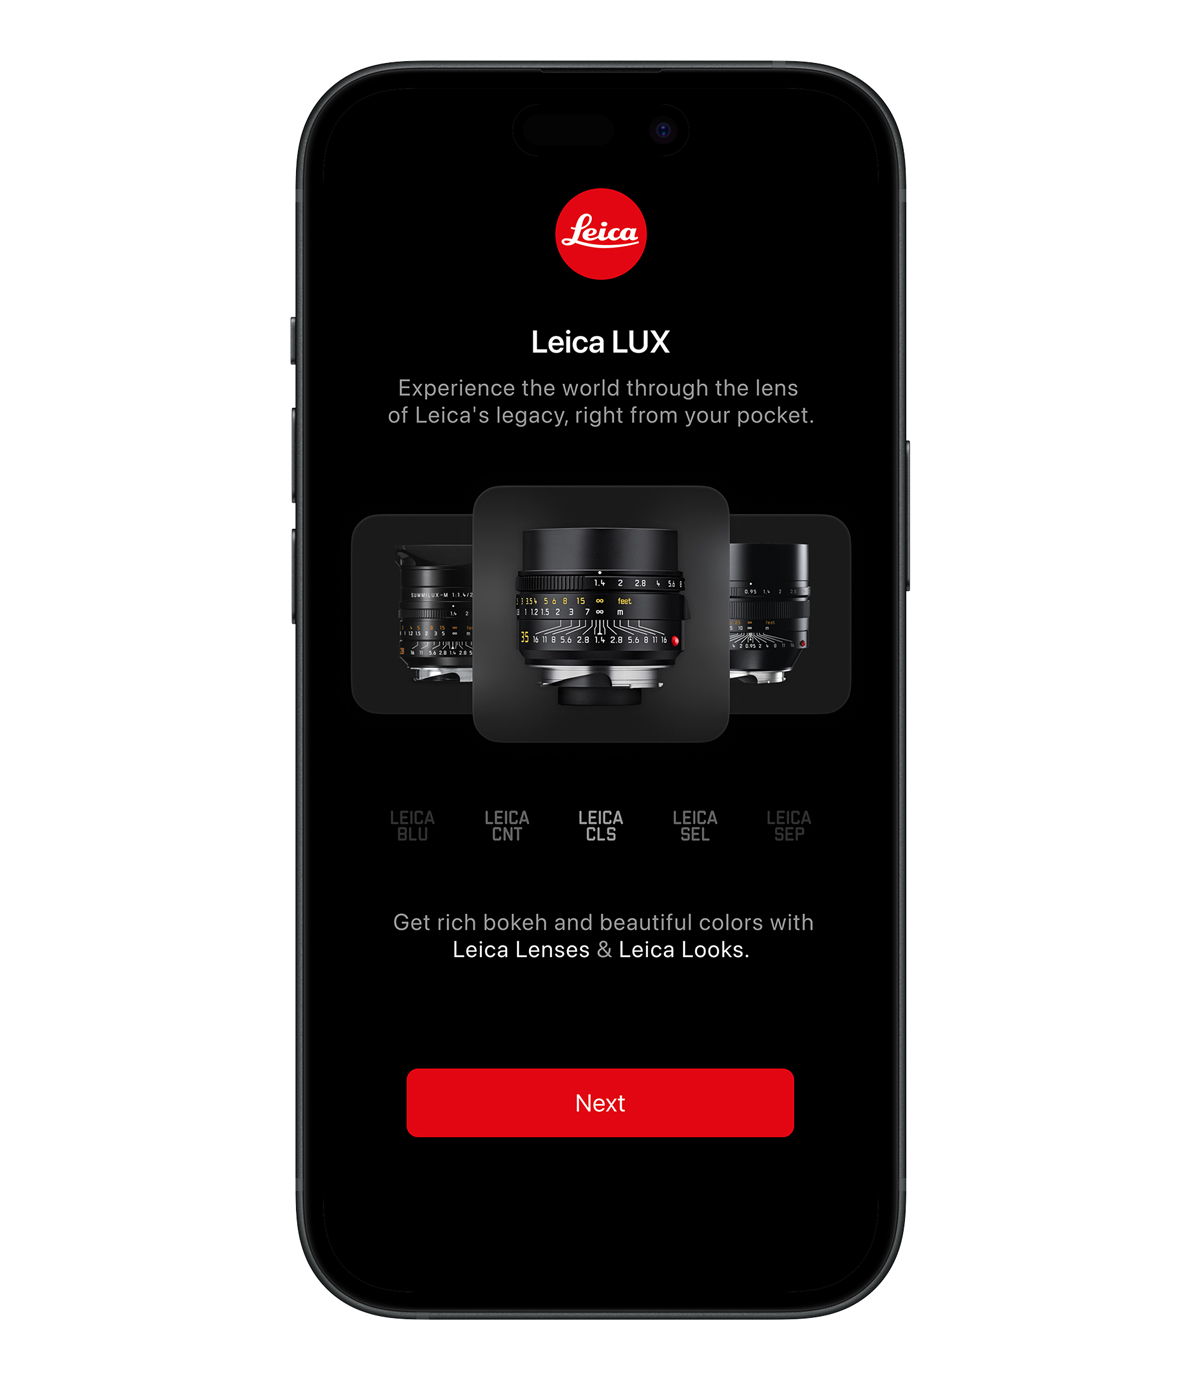 Leica LUXで使用できる機能